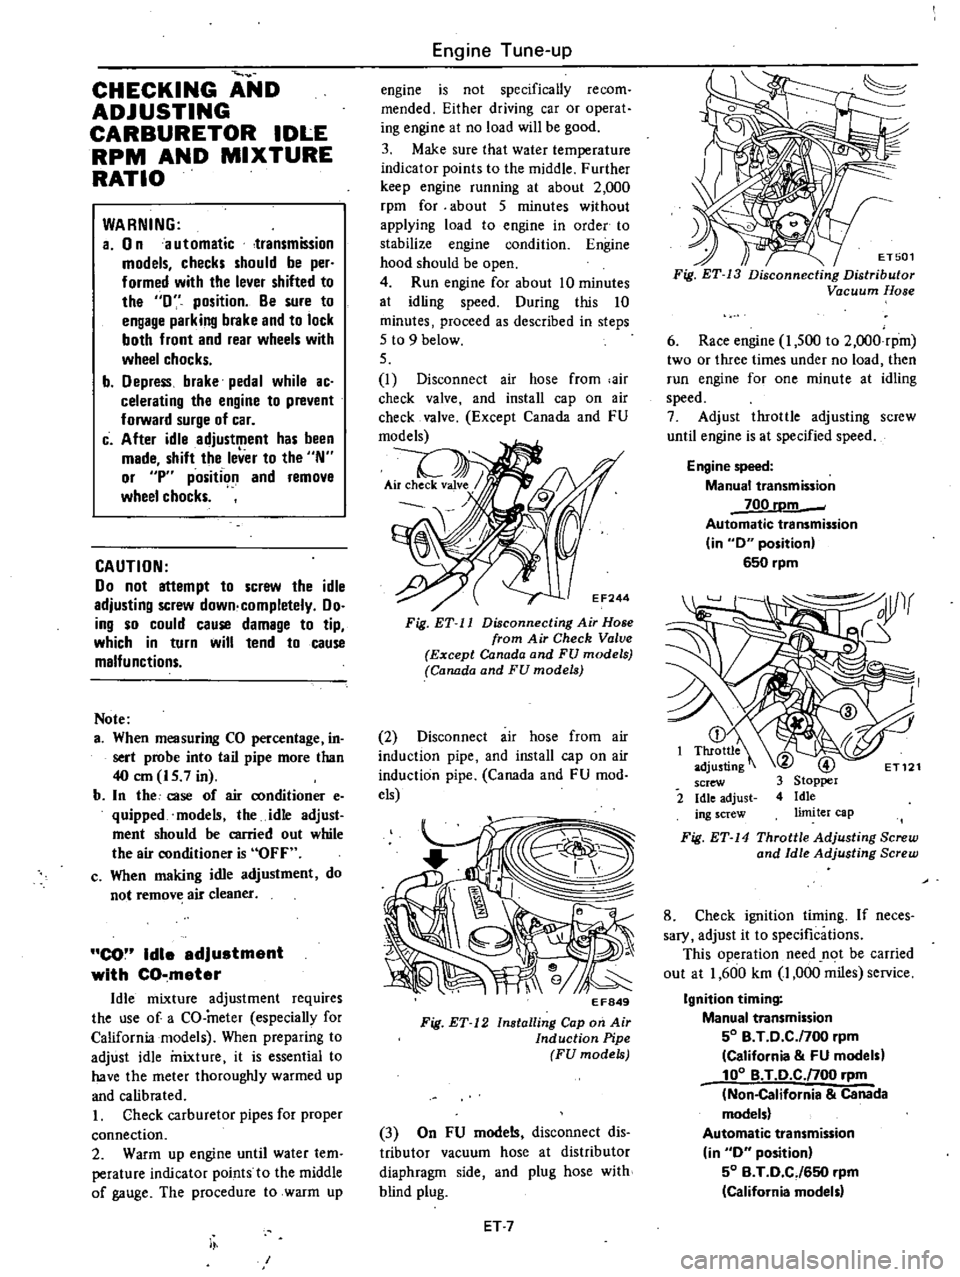 DATSUN 210 1979 Owners Manual 
CHECKING 
AND

ADJUSTING

CARBURETOR 
IDLE

RPM 
AND 
MIXTURE

RATIO

WARNING

a 
0

n 
a 
utomatic 
transmission

models 
checks 
should 
be

per

formed 
with 
the 
lever 
shifted 
to

the 
0

posi